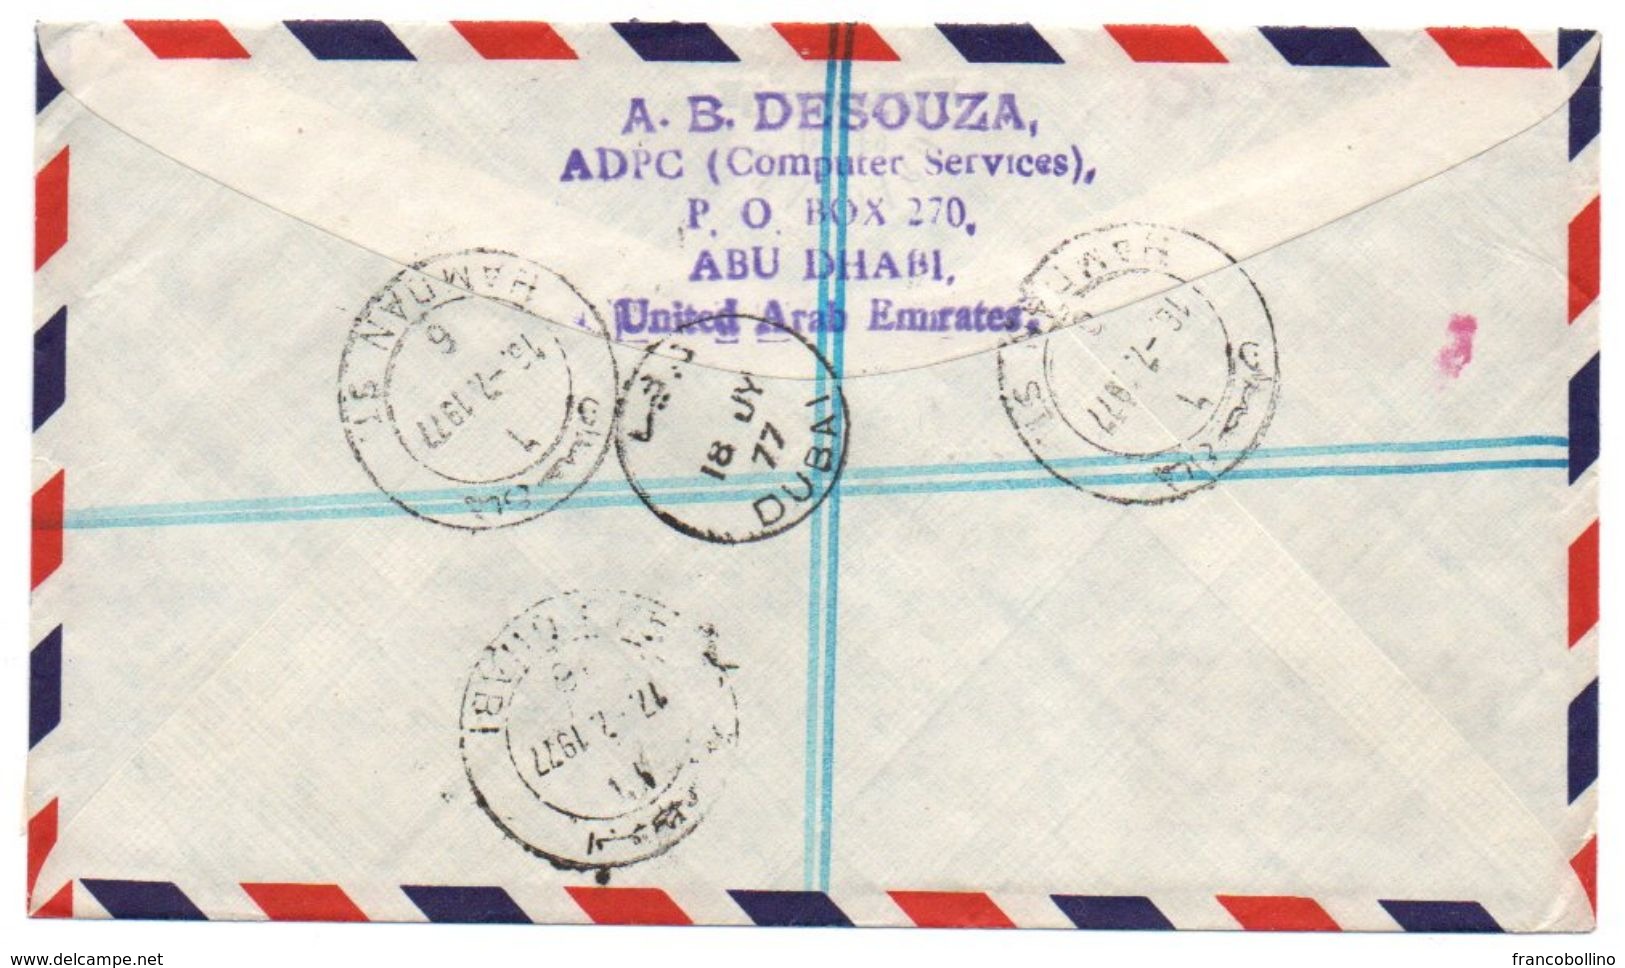 UNITED ARAB EMIRATES-ABU DHABI REGISTERED AIR MAIL COVER TO AUSTRIA 1977 / THEMATIC OVERPRINT STAMPS/FALCONRY - Abu Dhabi